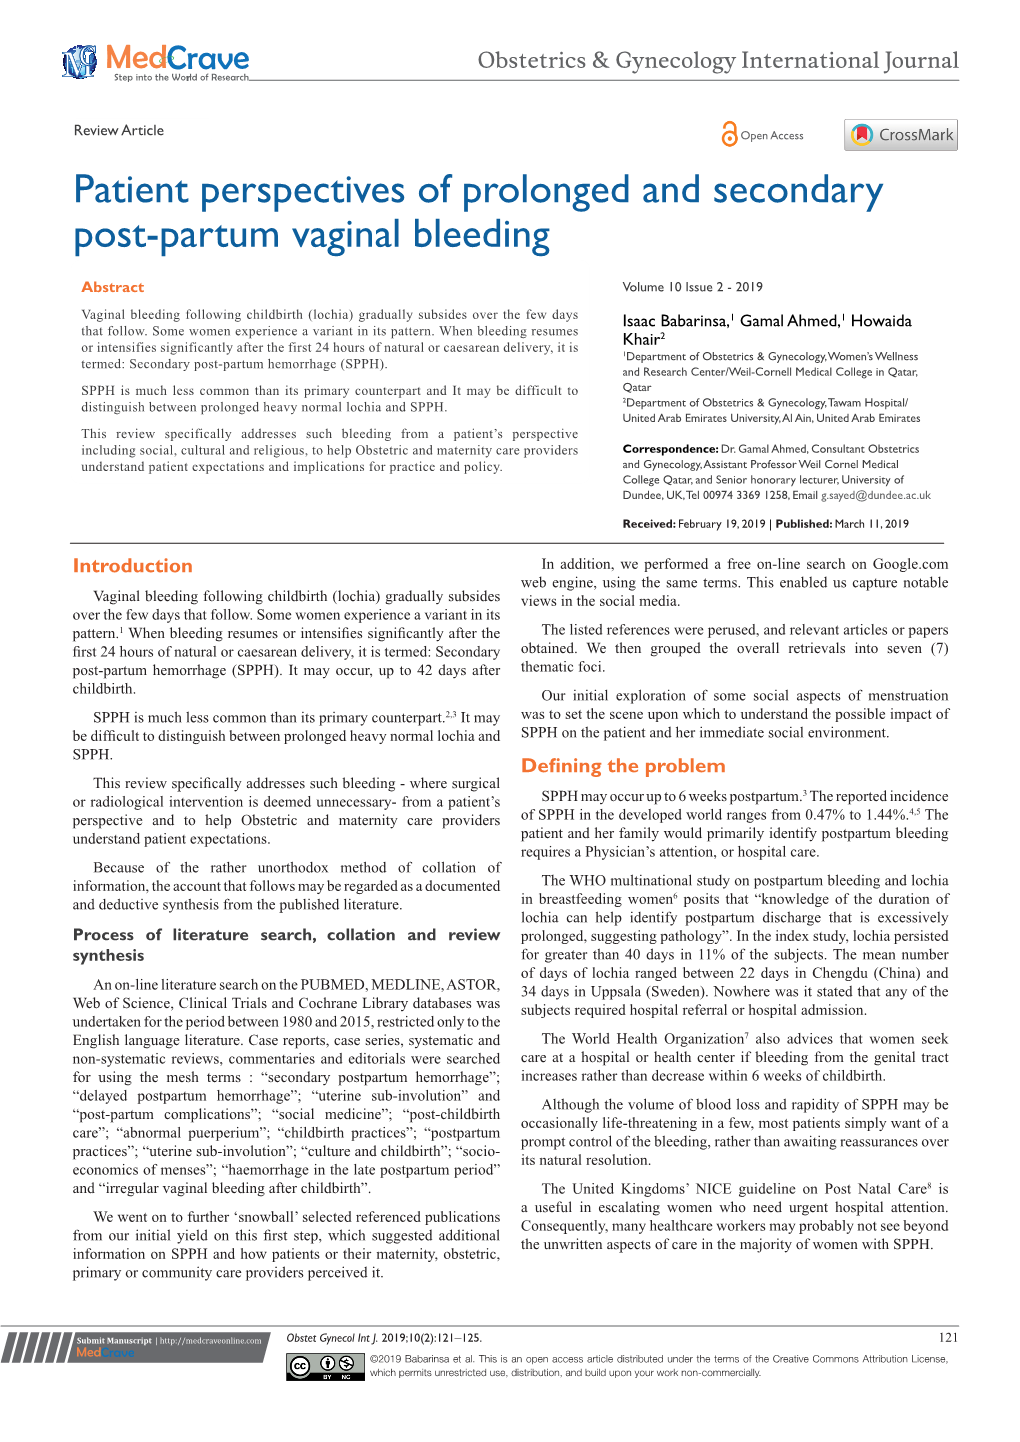 Patient Perspectives of Prolonged and Secondary Post-Partum Vaginal Bleeding